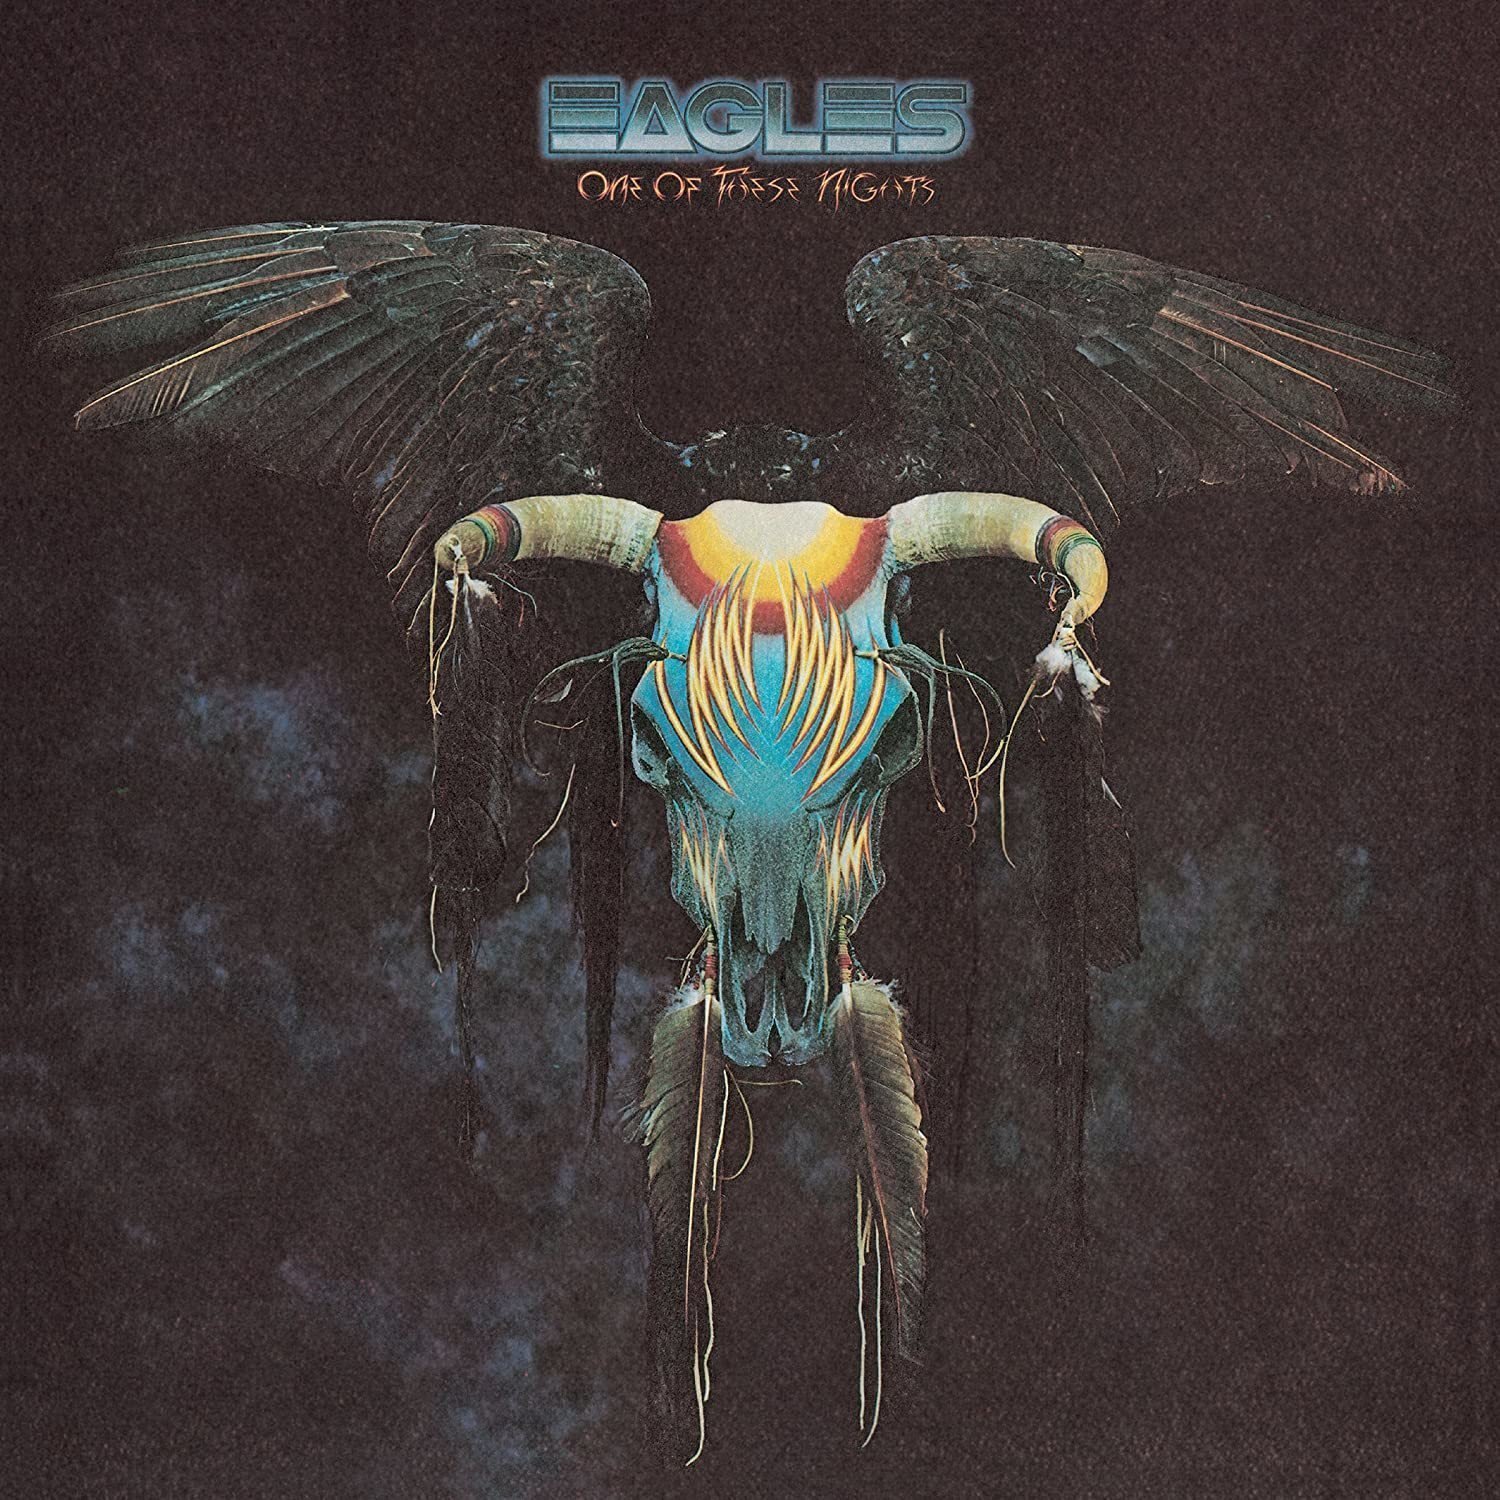 Vinylplade Eagles - One Of These Nights (LP)